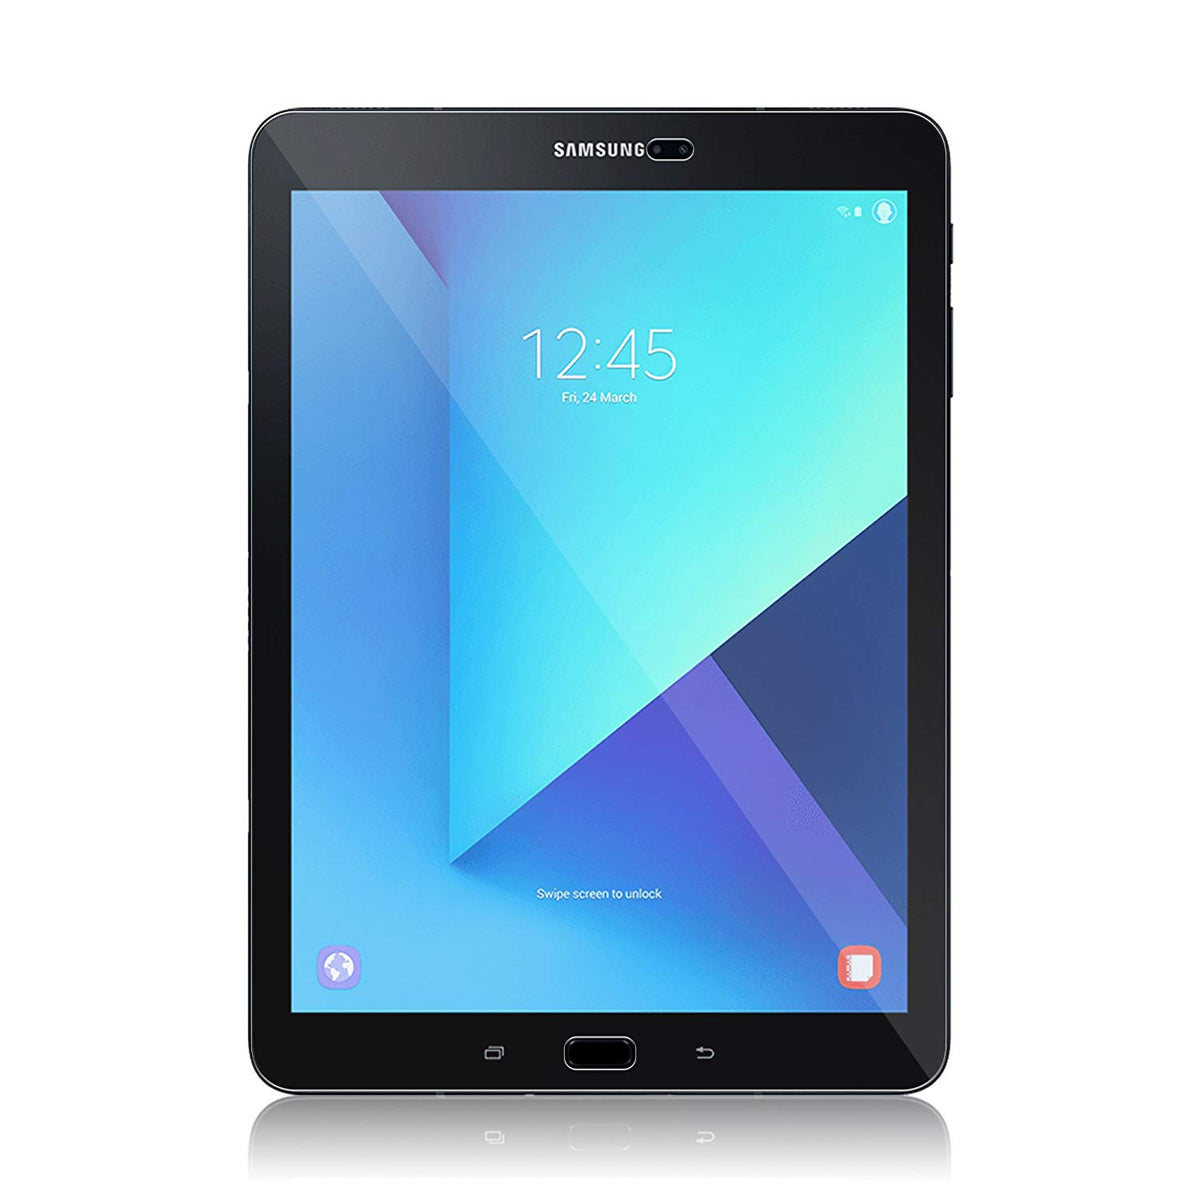 Tempered Glass Screen Protector for Galaxy Tab S3, S2 9.7